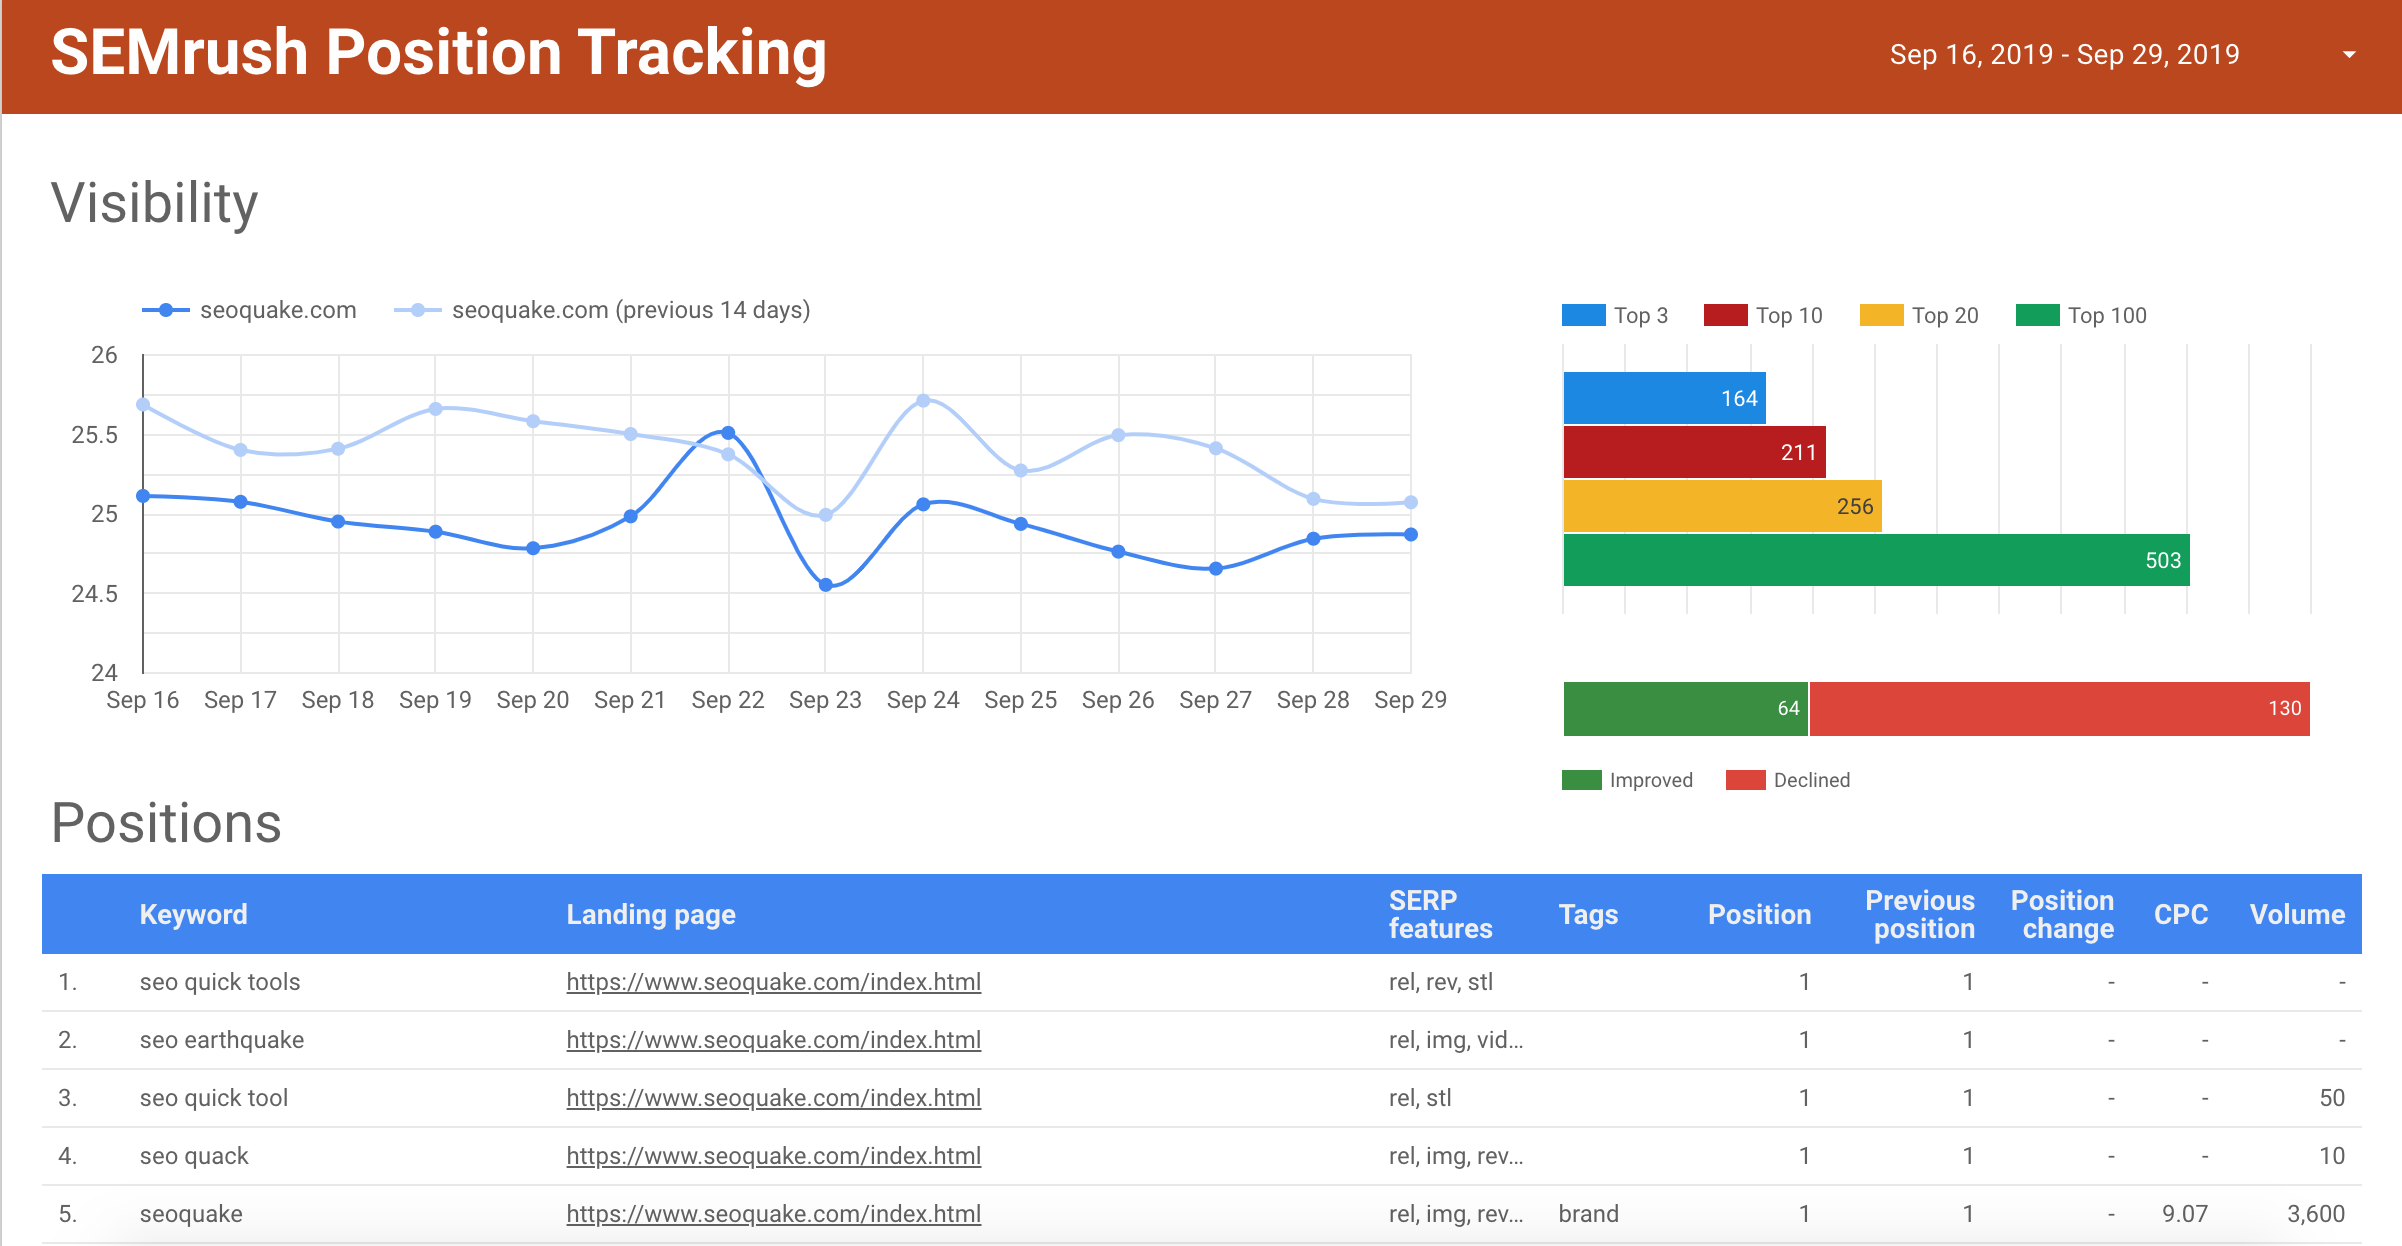 what-s-new-in-semrush-september-2019-product-updates-and-changes